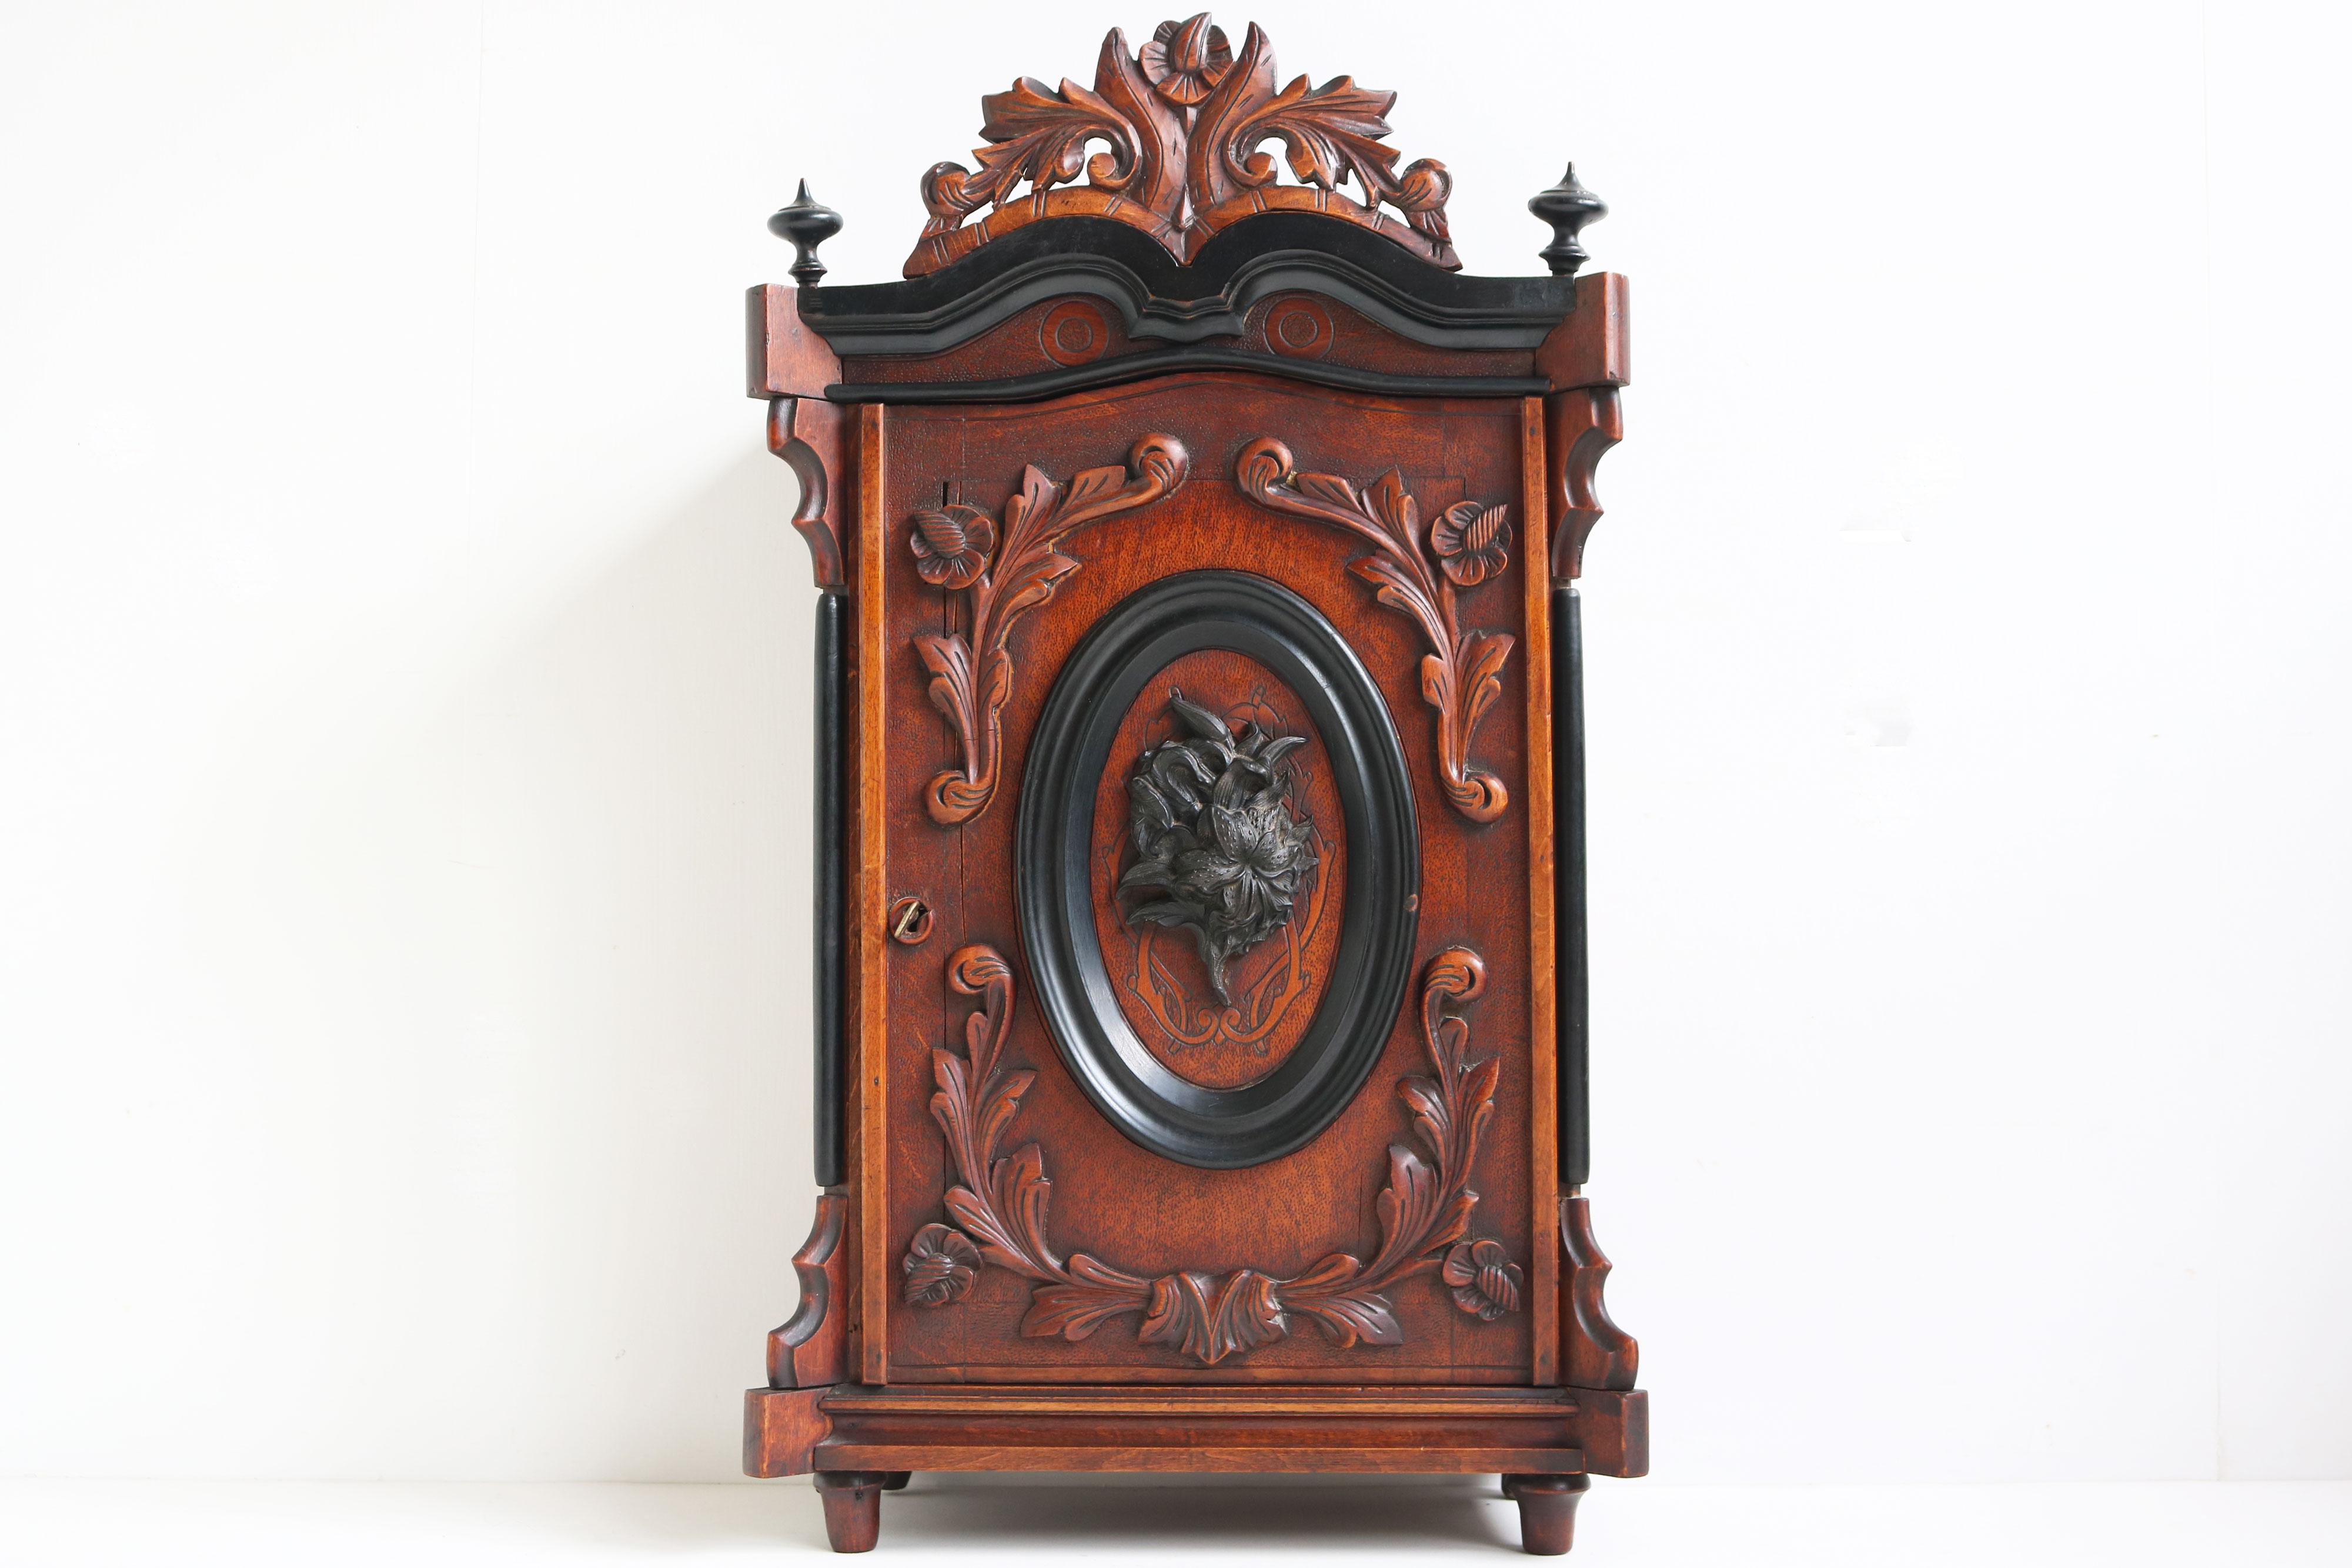 Rare 19th century antique French Napoleon lll Tobacco / cigar humidor Wall cabinet / table cabinet. 
Fully hand carved with floral decorations and wood carvings with ebonized details. 
The interior offers 6 compartments to dry your cigars / tobacco